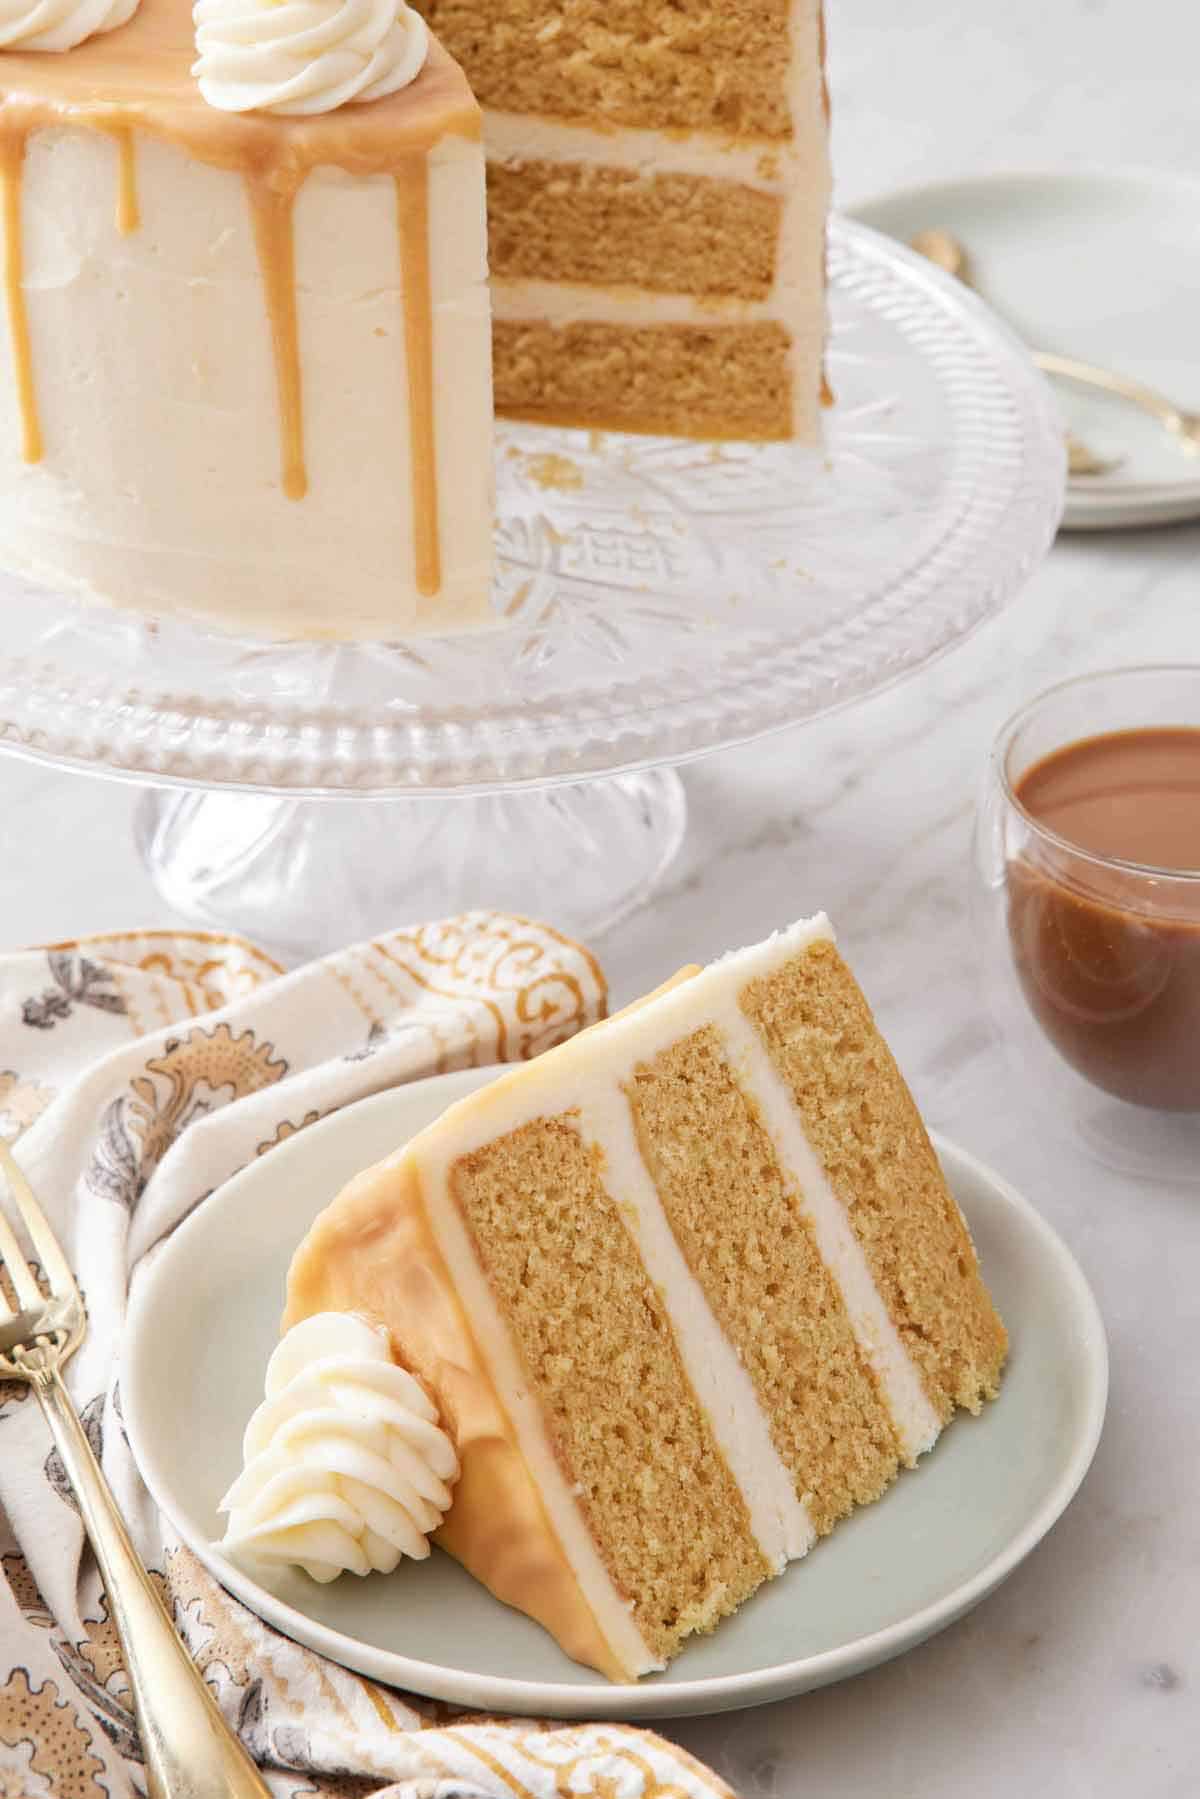 A slice of butterscotch cake on a plate with the rest of the cake in the background on a cake stand.